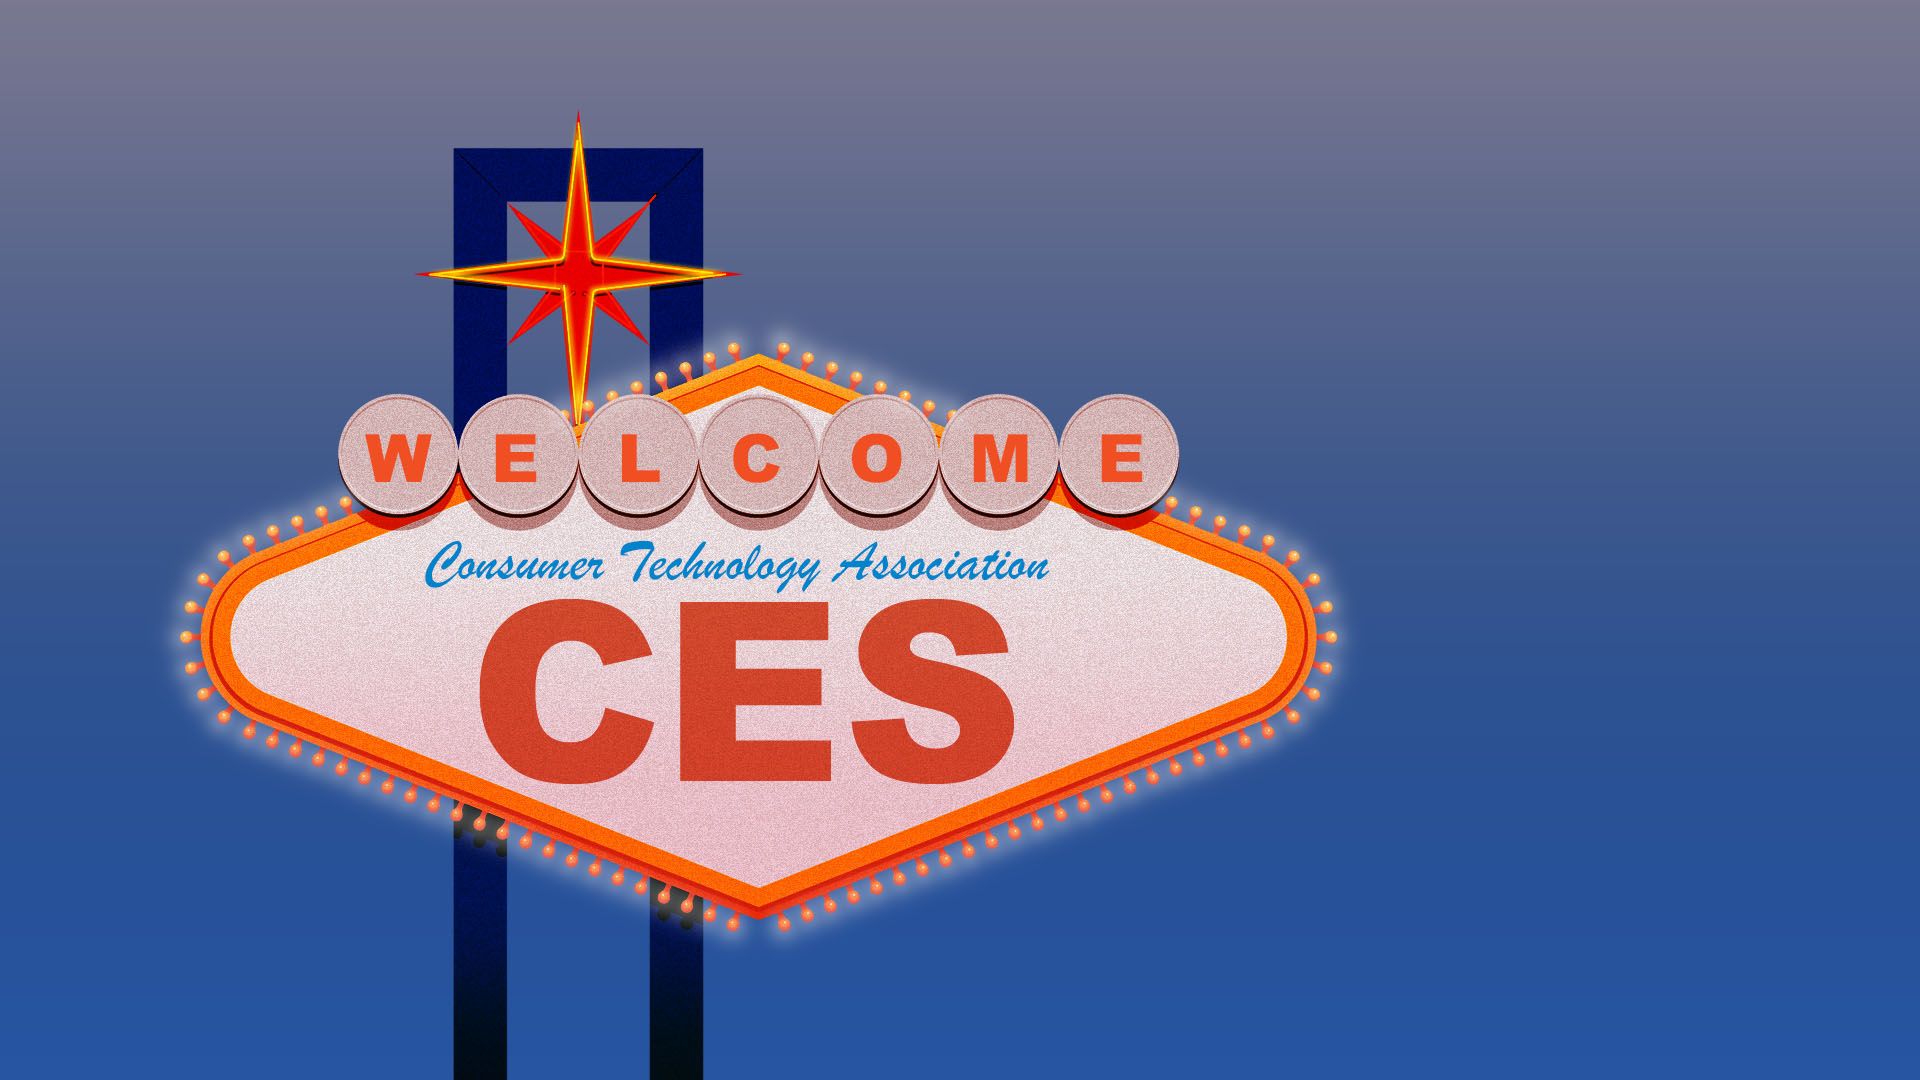 Illustration of the famous Las Vegas welcome sign reading "Consumer Technology Association" and "CES"